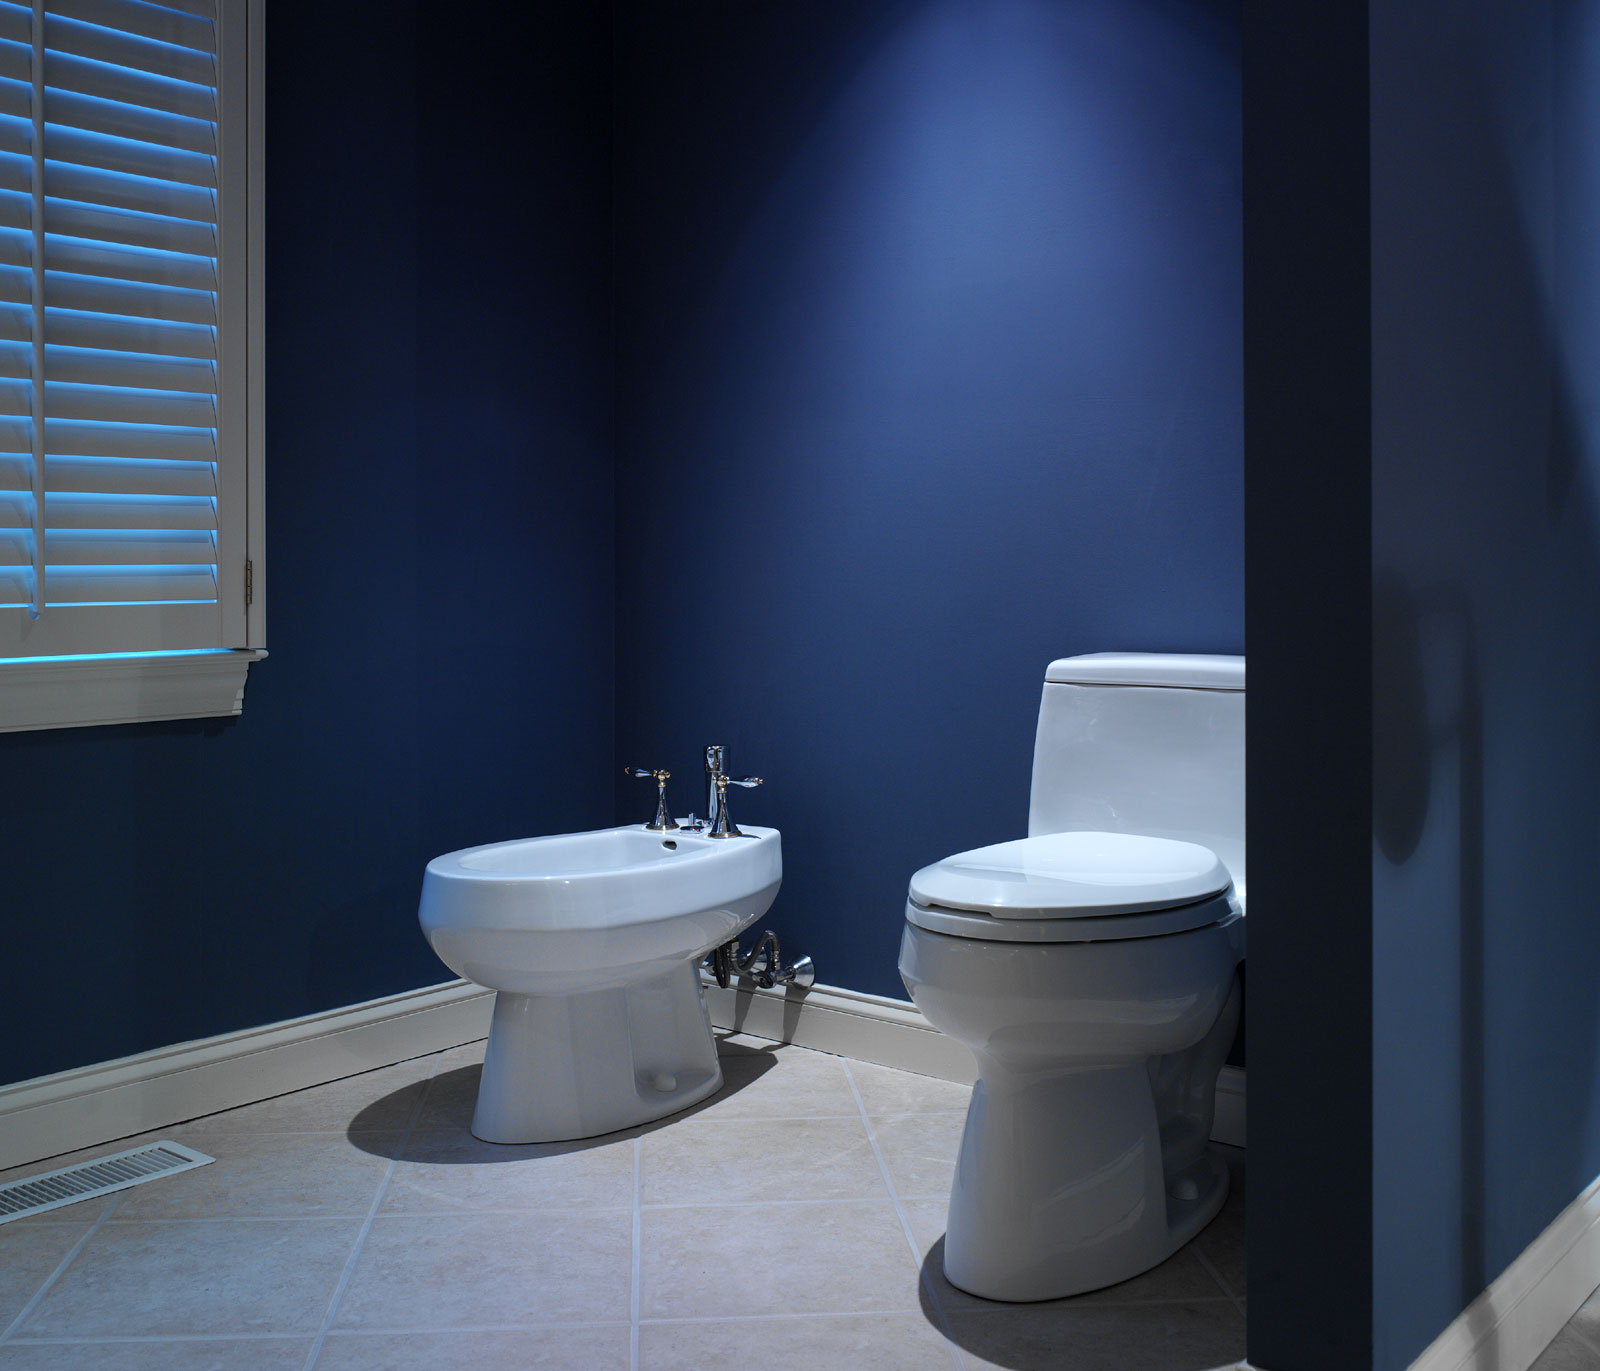 Recessed lights in water closet